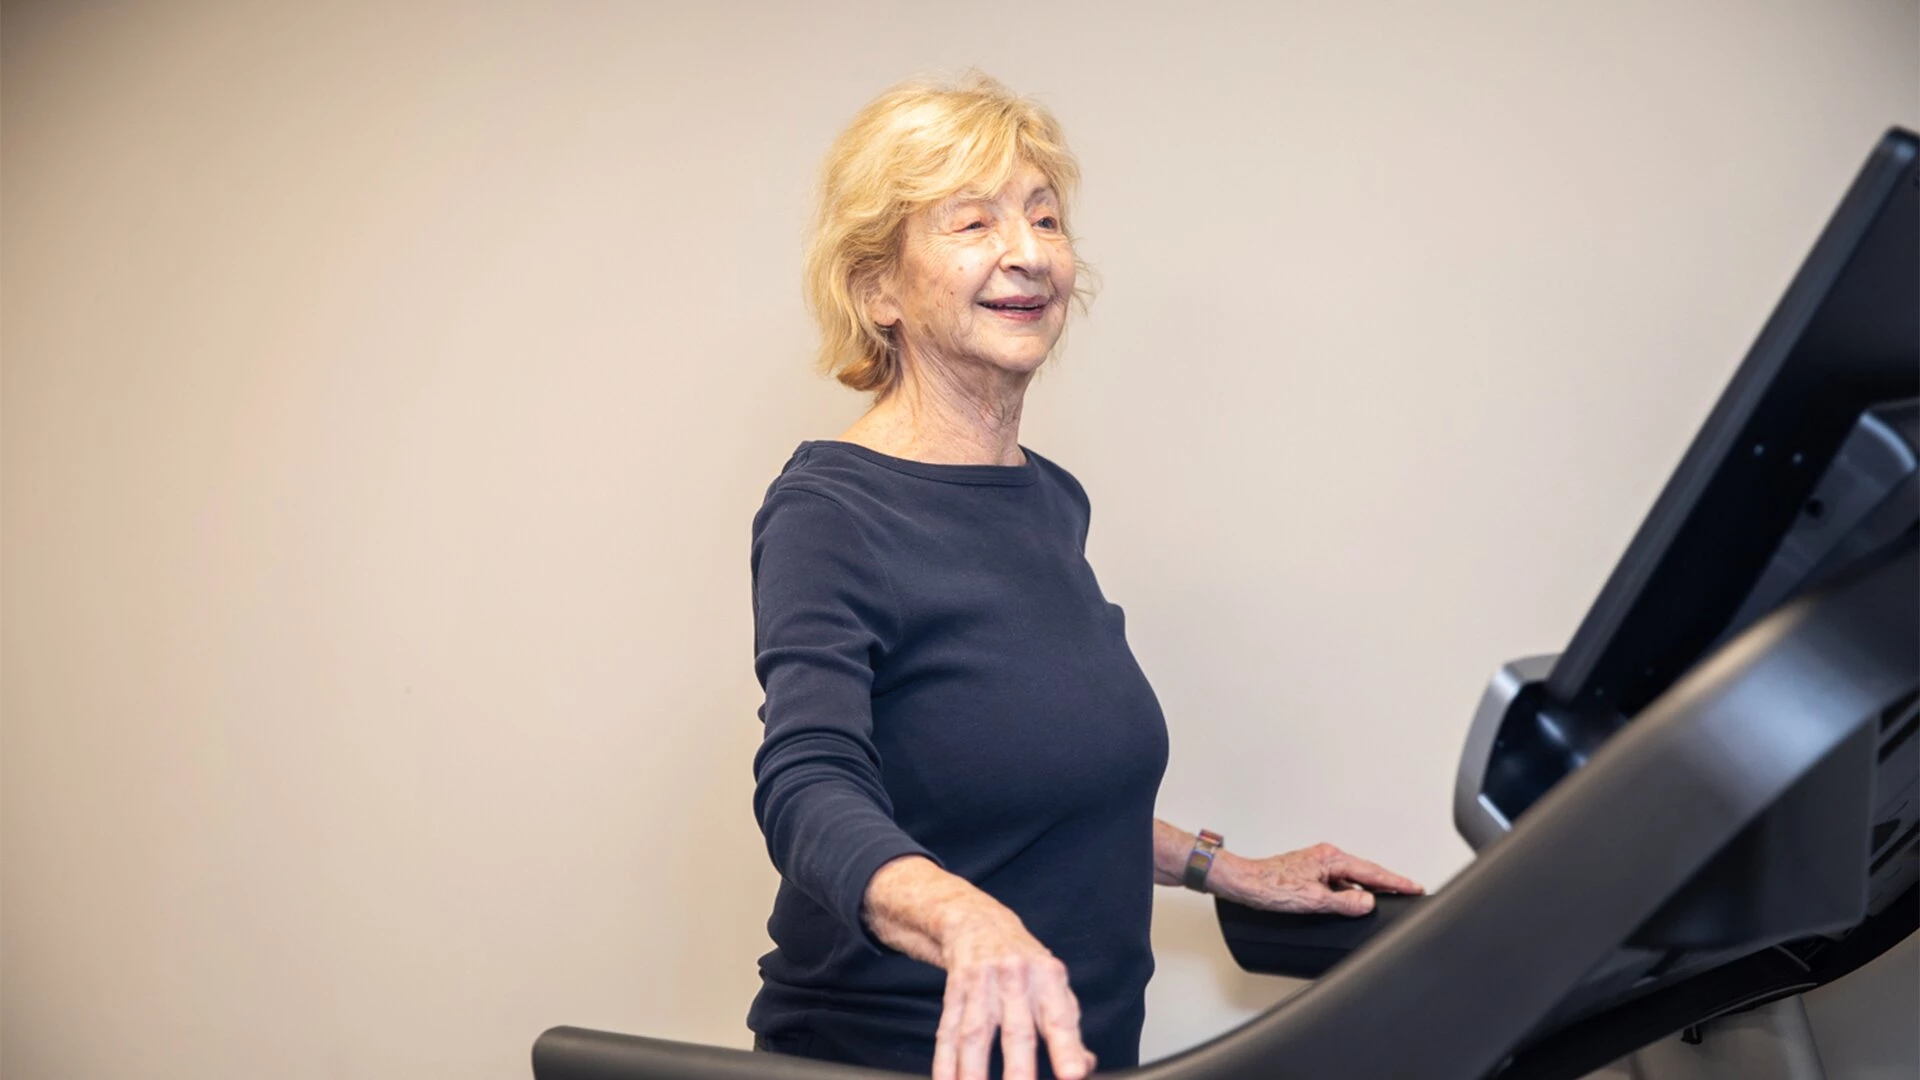 exercise programs for seniors include walking on a treadmill